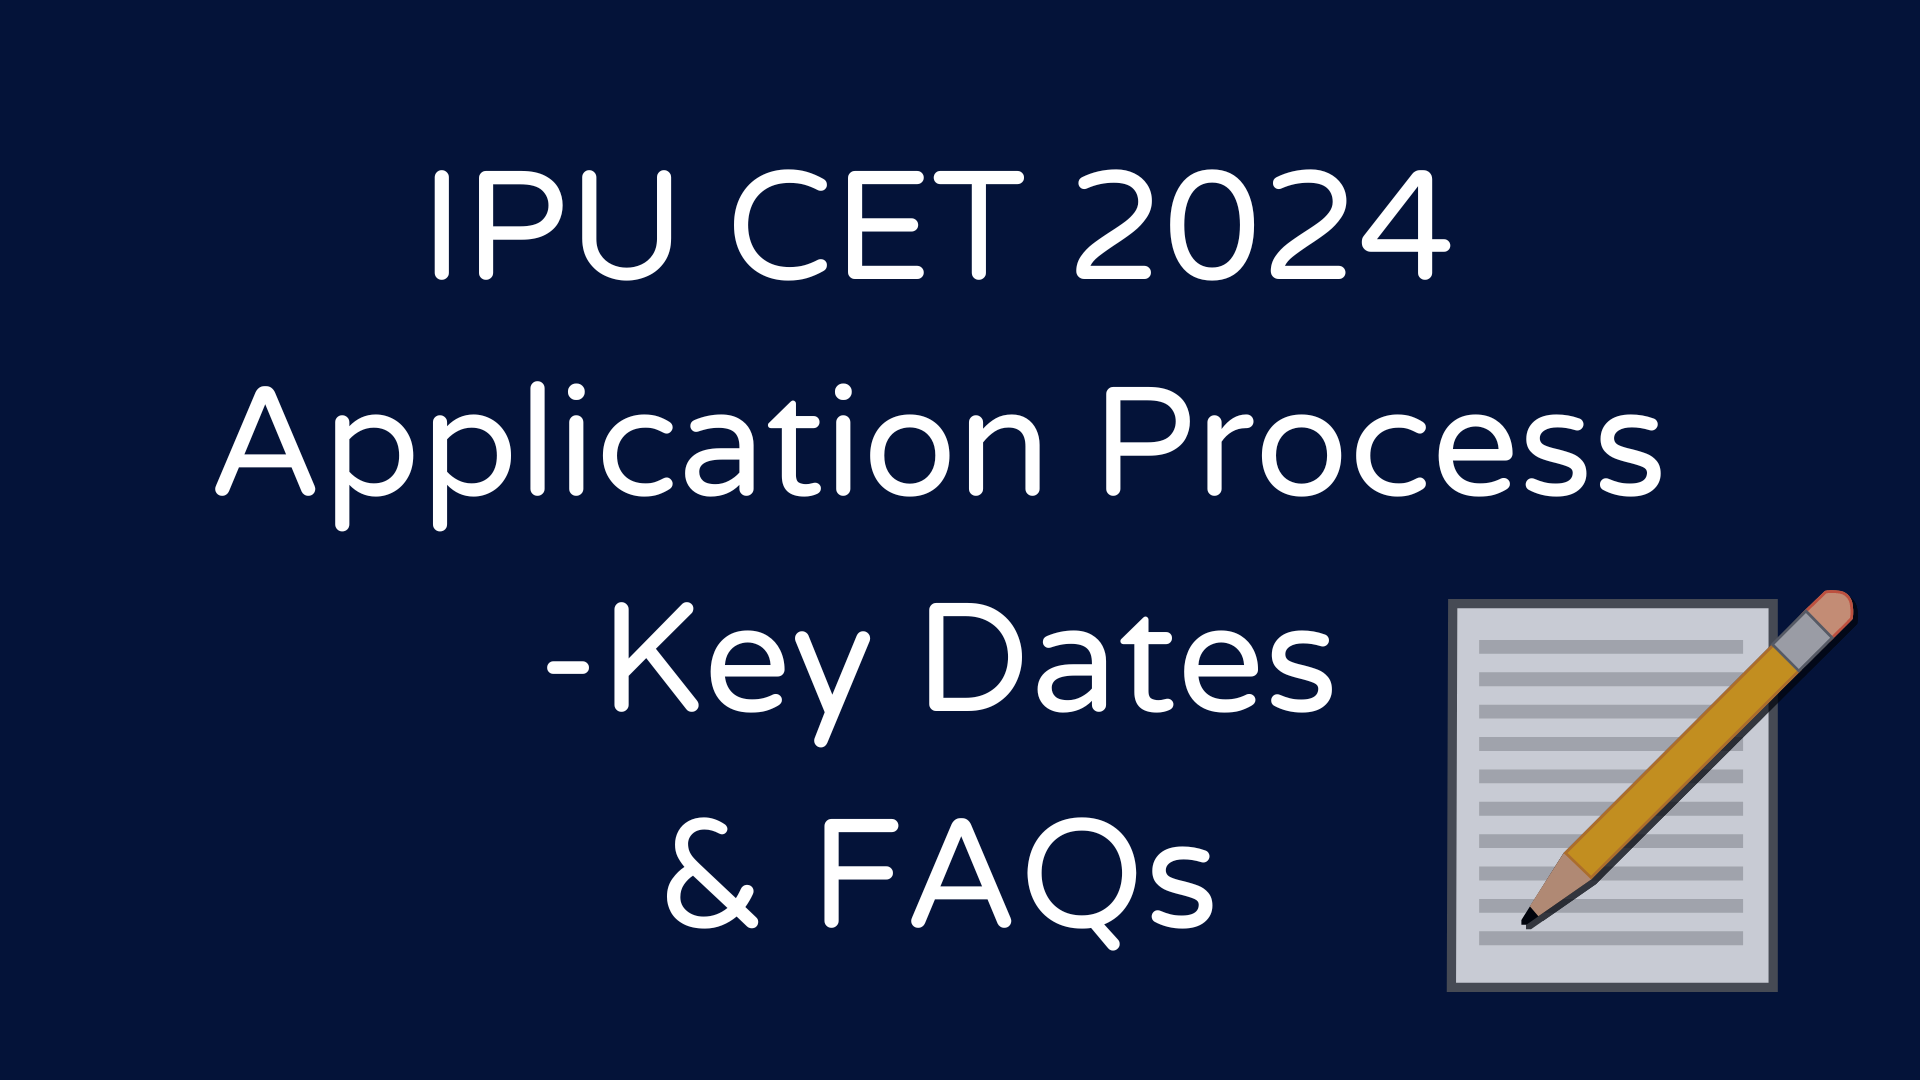 IPU CET 2024 Application: Key Dates and Opening Details